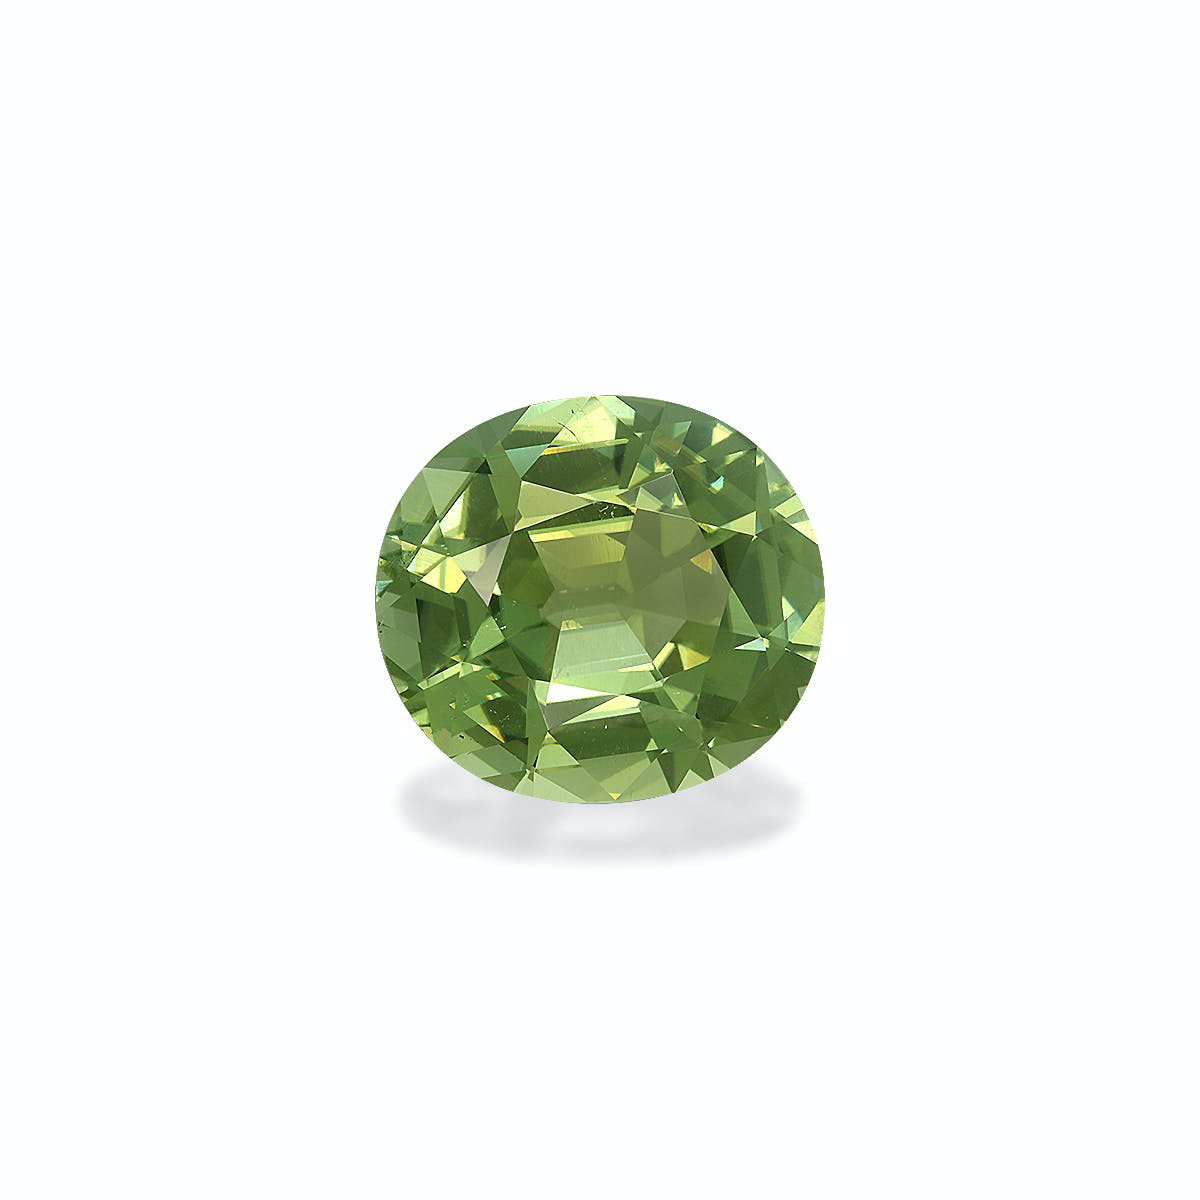 Picture of Pistachio Green Tourmaline 23.53ct - 20x18mm (TG0531)